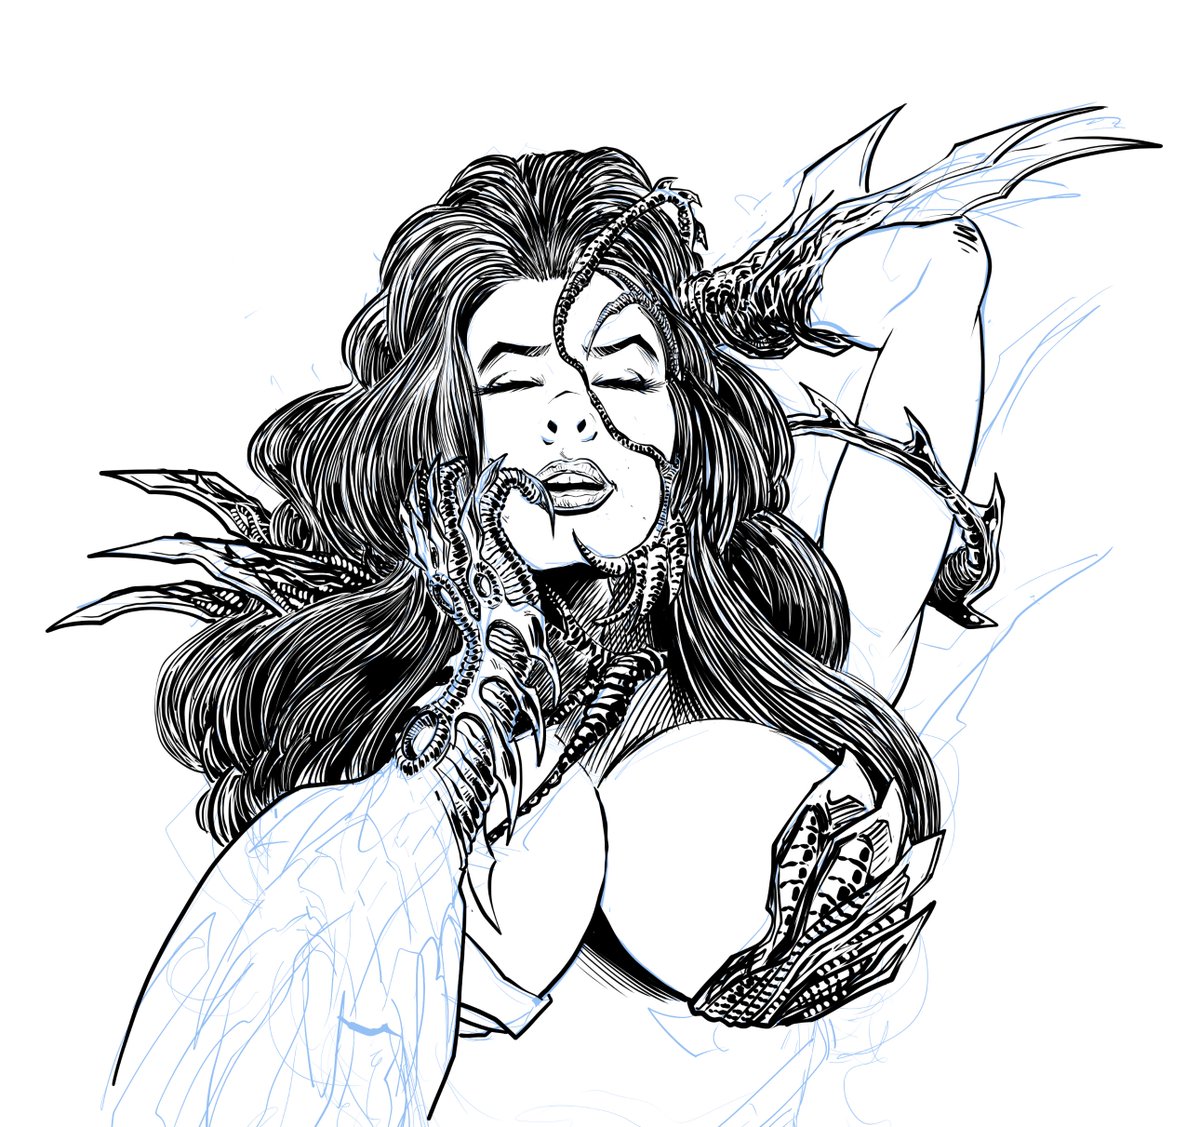 Little more progress on Sara. #witchblade @TopCow